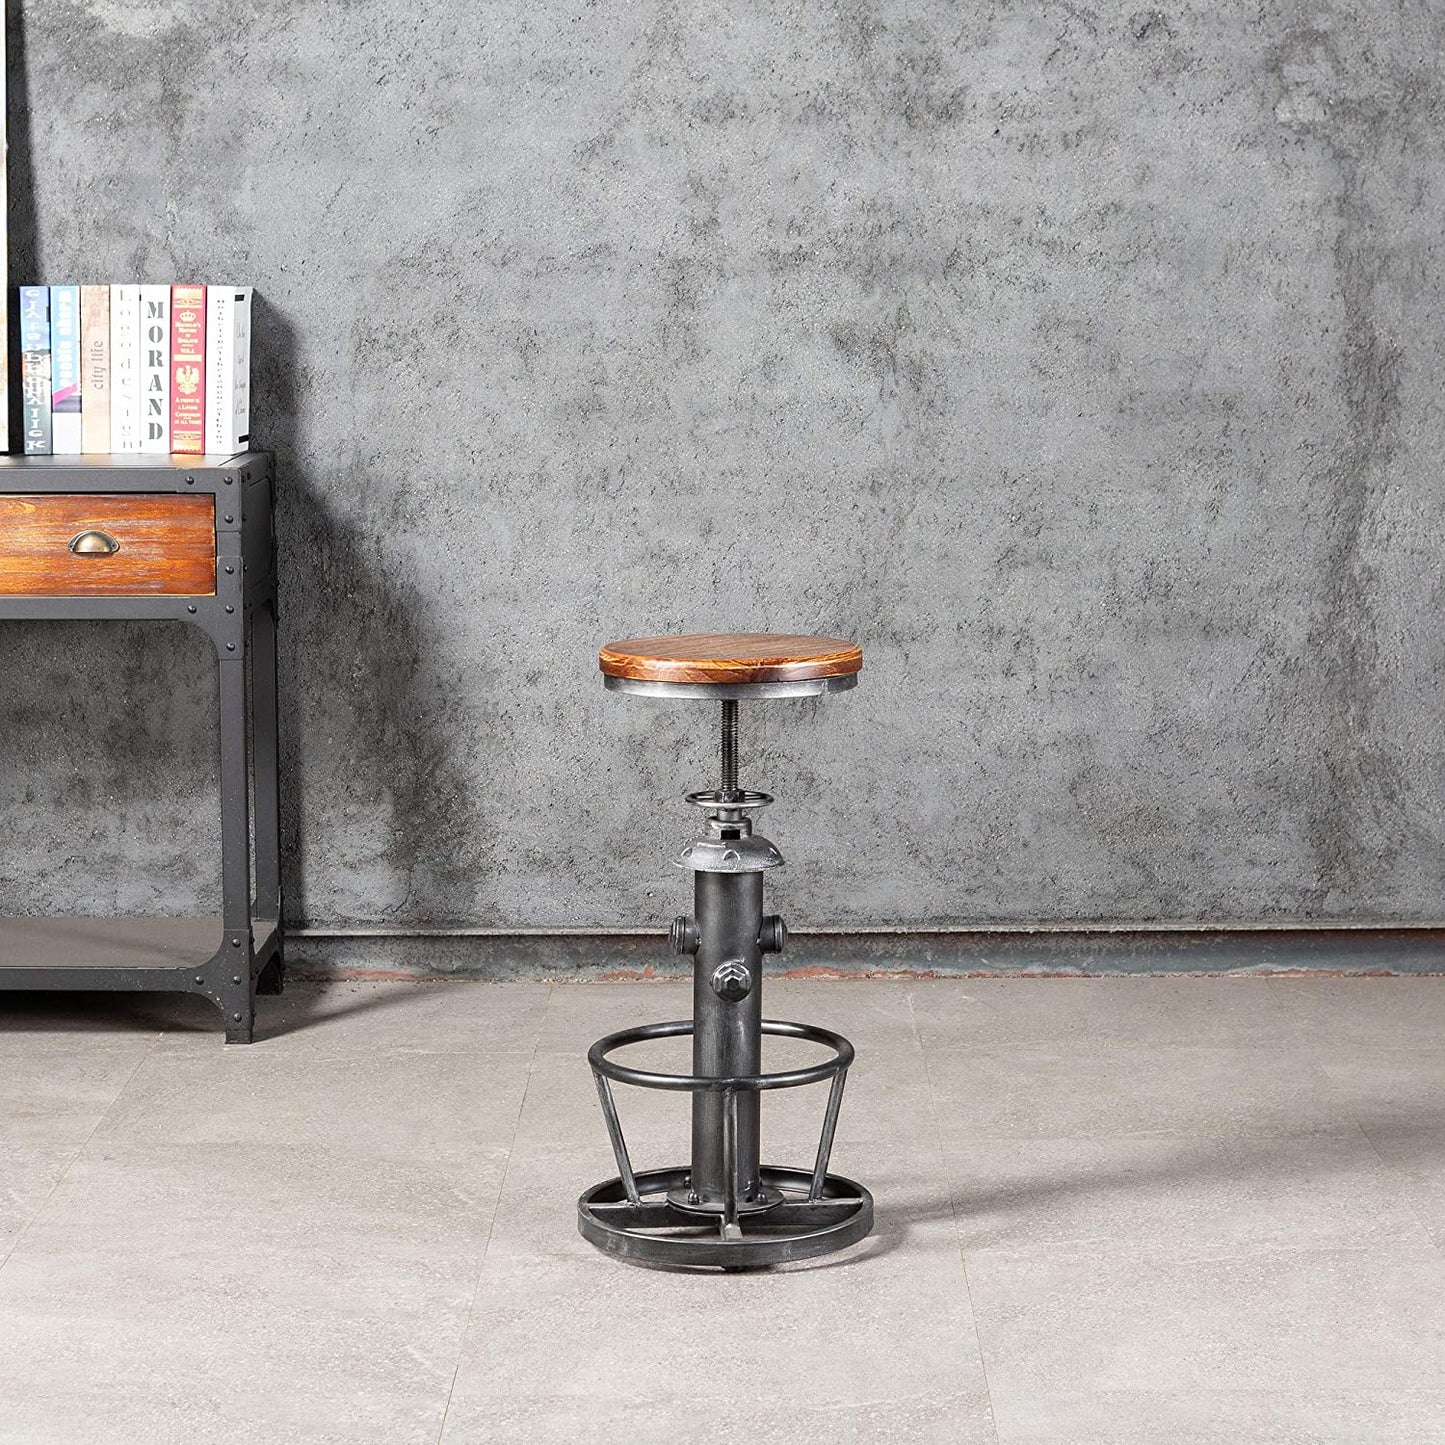 American Antique Industrial Round Bottom Adjustable Height Cafe Coffee Retro Vintage Stylish Water Pipe Design Pub Kitchen Bar Stool